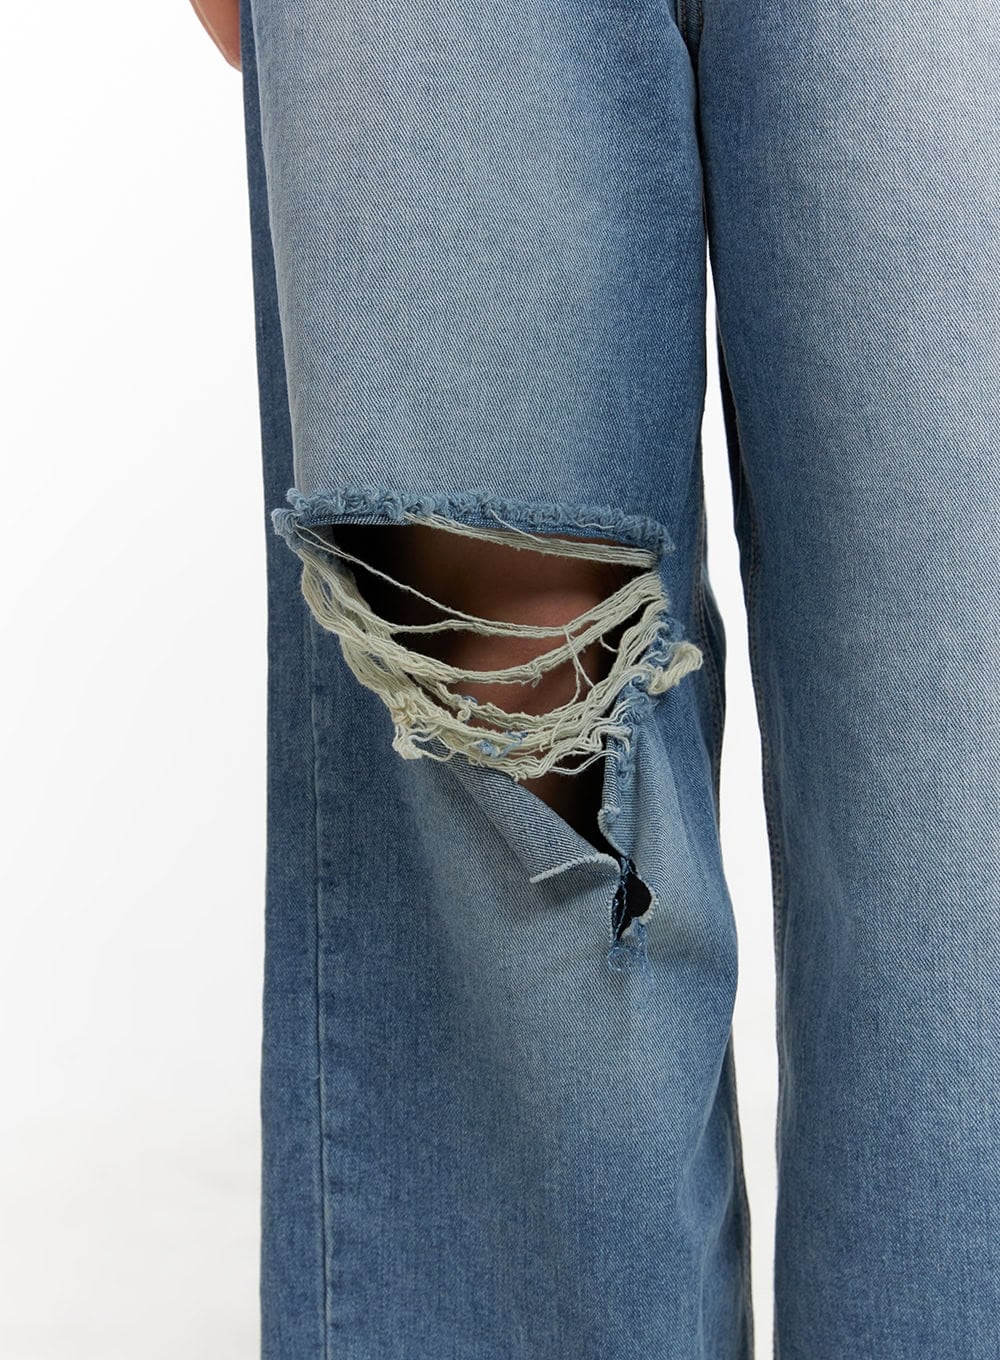 destroyed-washed-baggy-jeans-cy414